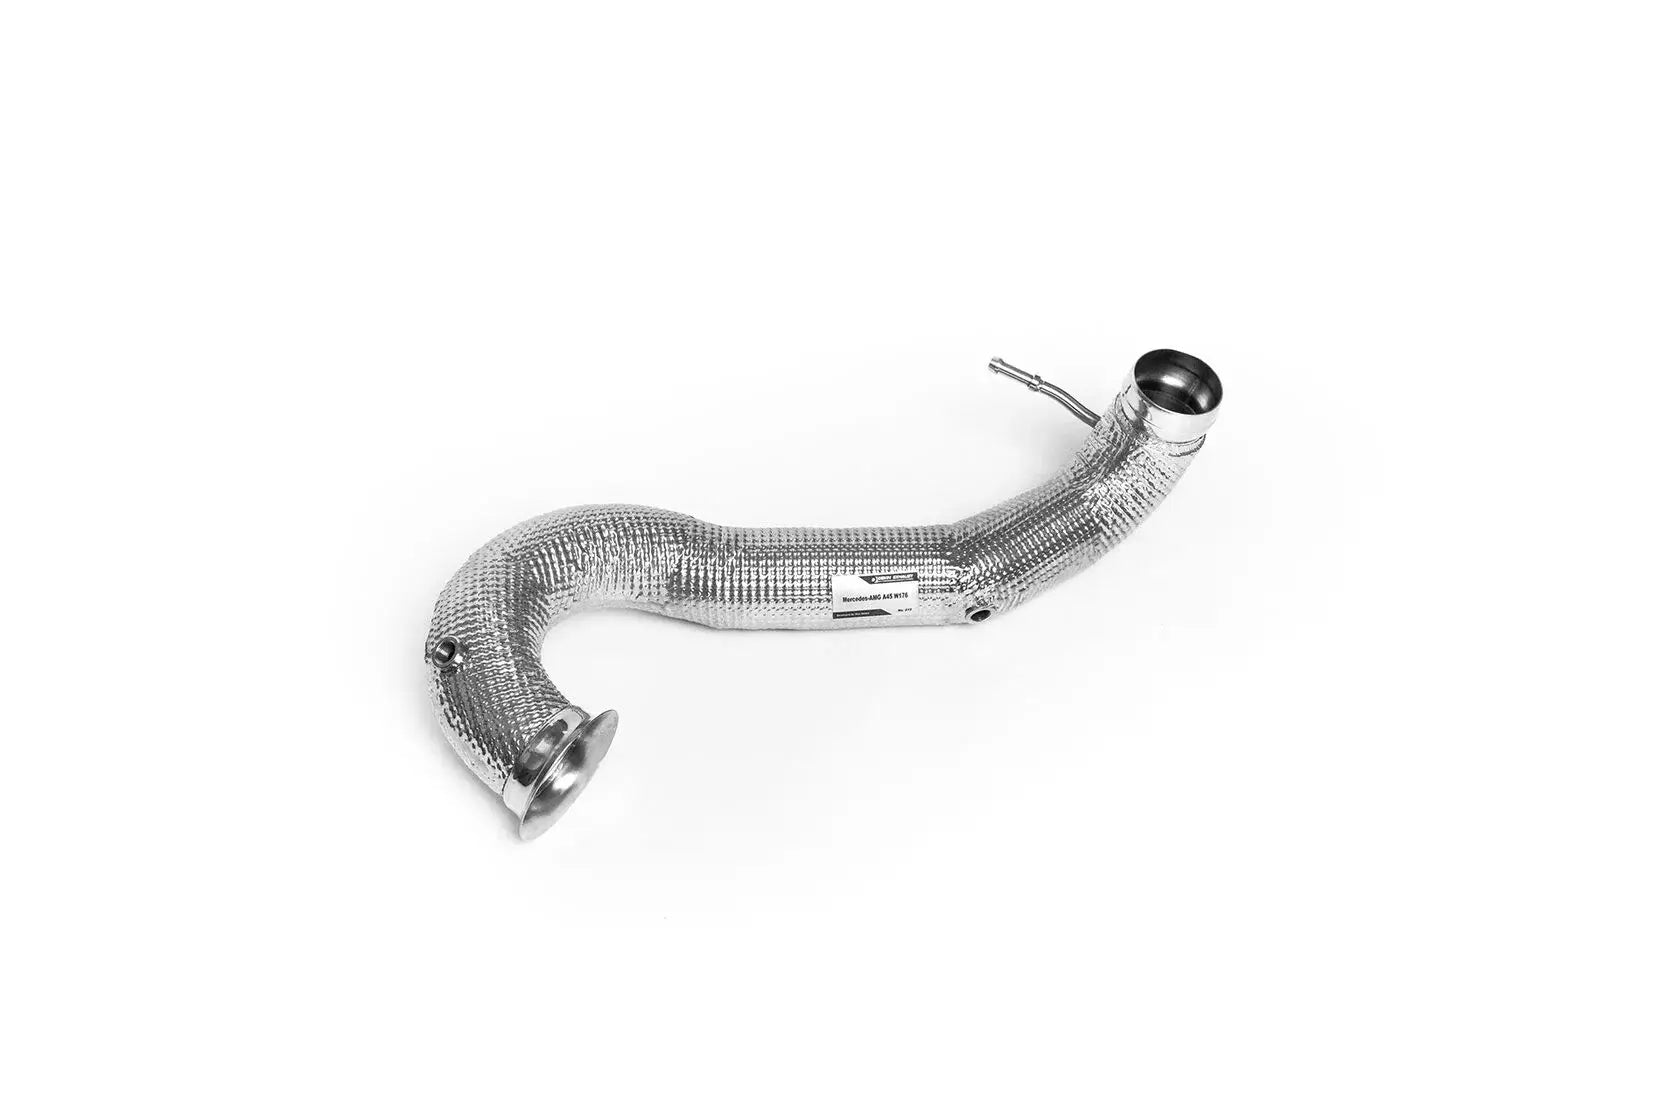 DEIKIN 10-MB.A45.W176-DPT Downpipe for Mercedes-AMG A45 (w176) with thermal insulation HeatShield Photo-0 